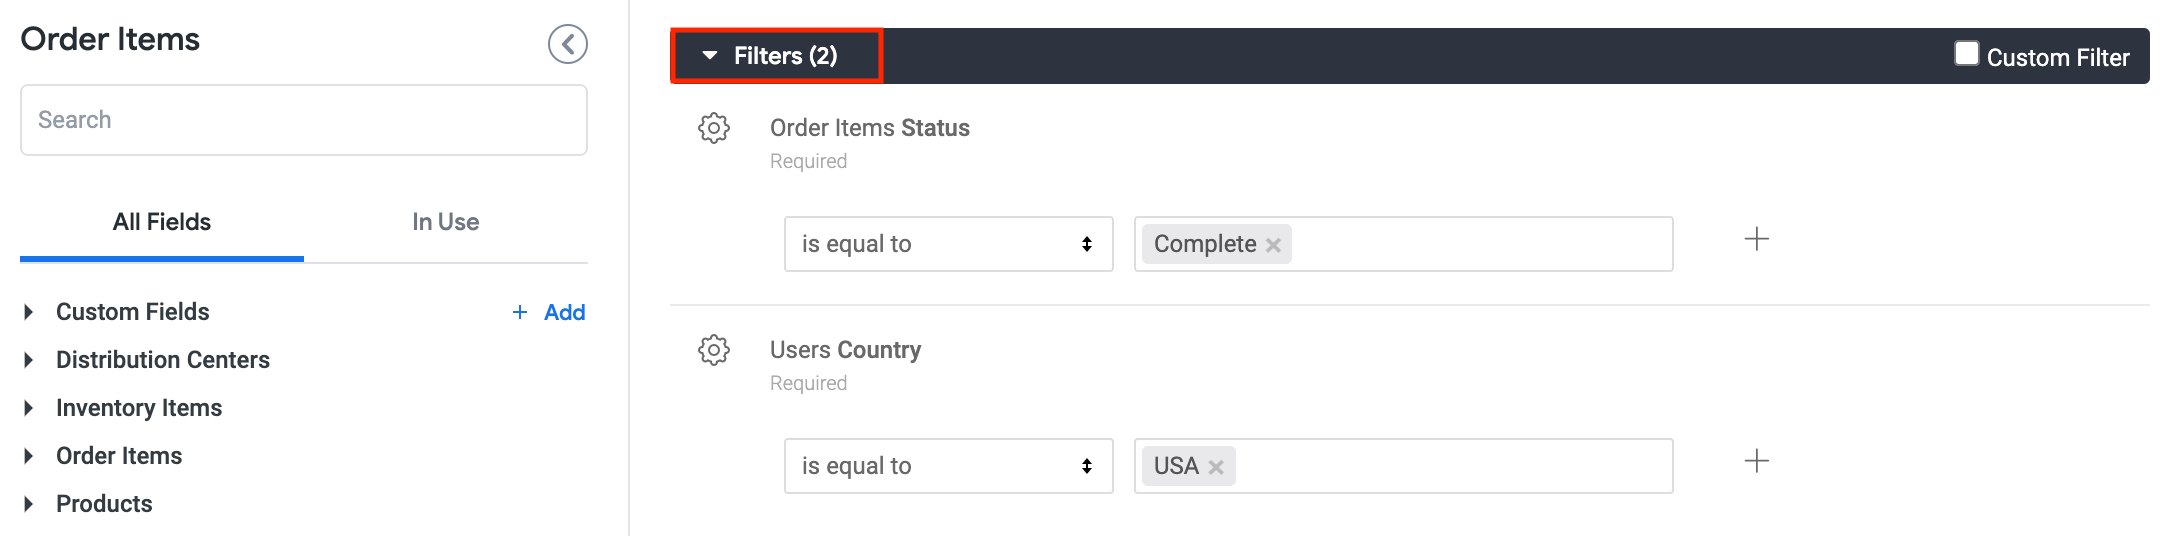 Two filters listed; Order Items Status is equal to Complete, and Users Country is equal to USA.